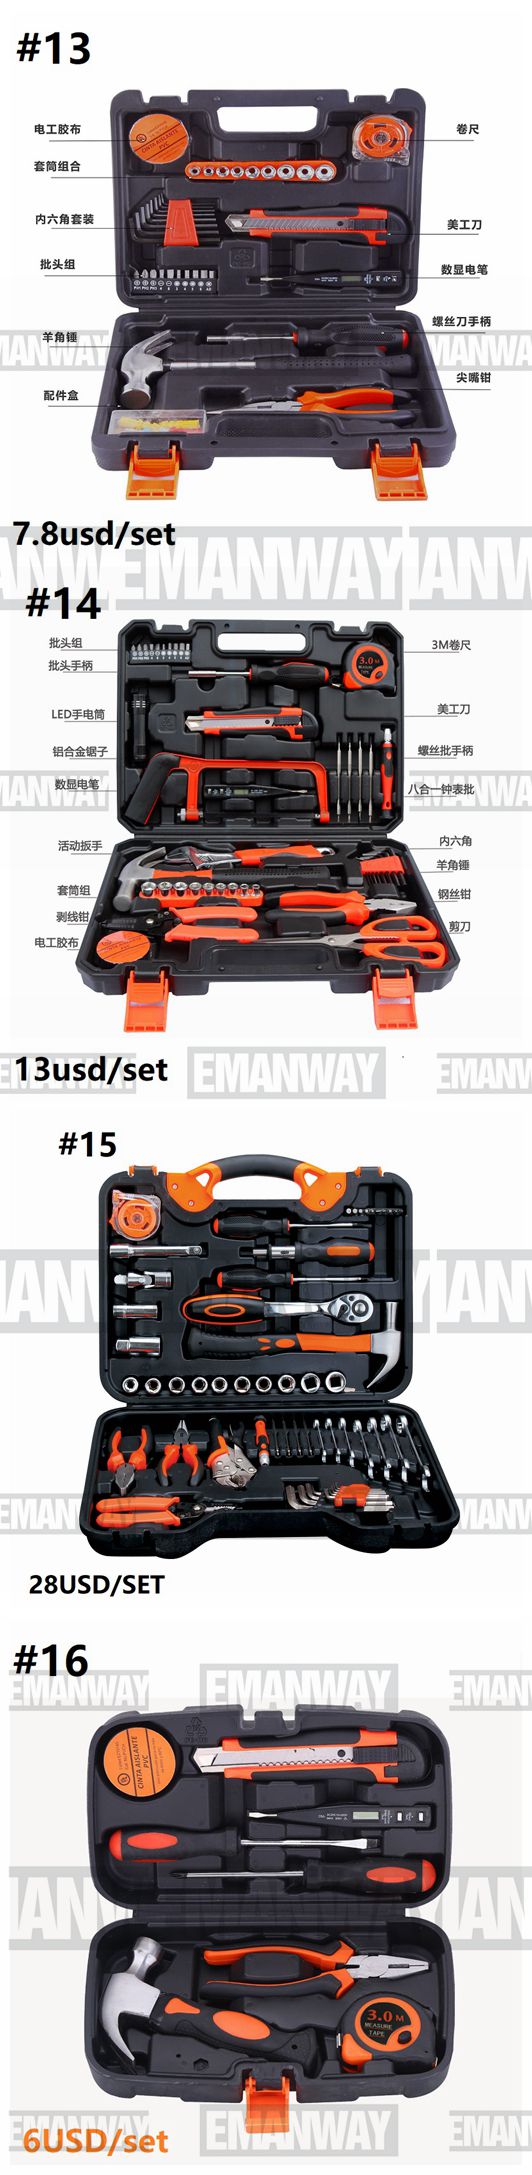 hand tools set picture